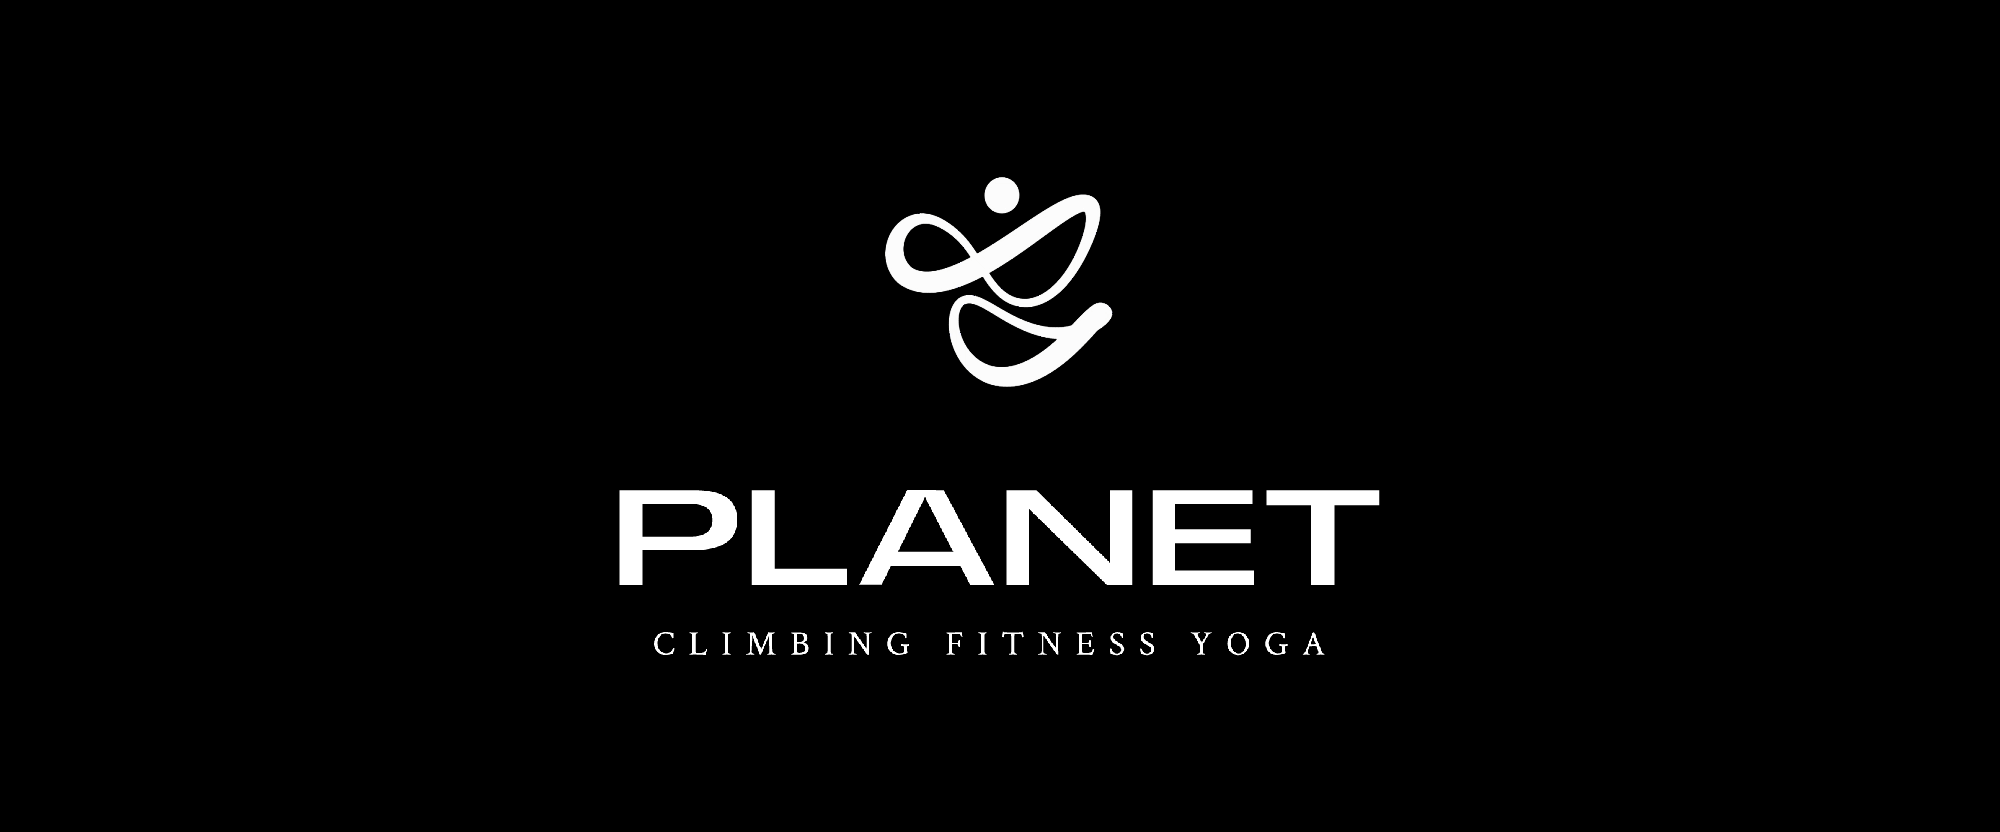 New Logo and Identity for Planet by Tundra